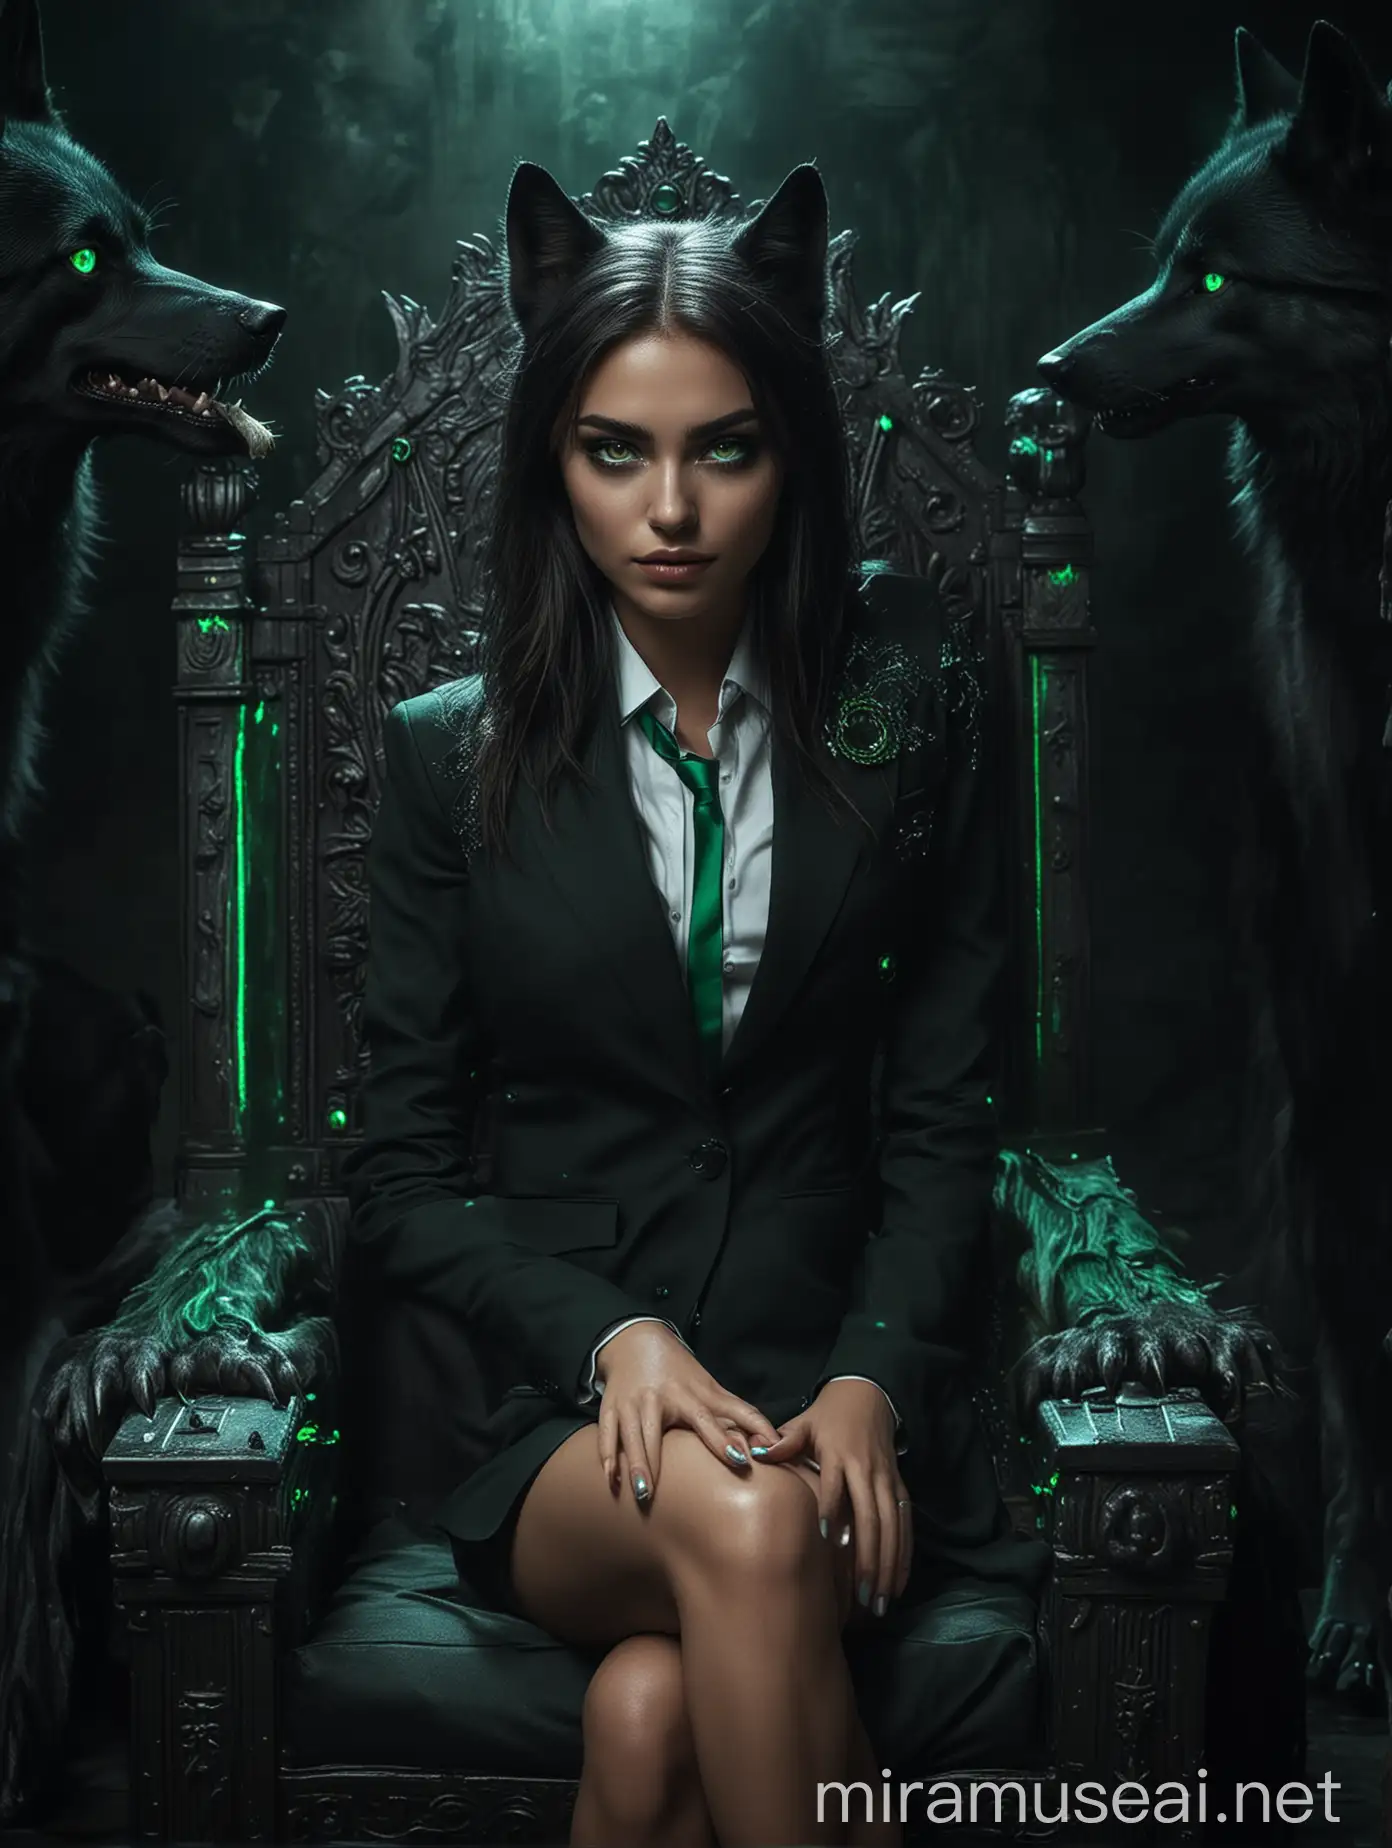 A beautiful woman in suit and green glowing eyes posing on a throne with pride, with a black big green eye wolf beside her, in a dark environment